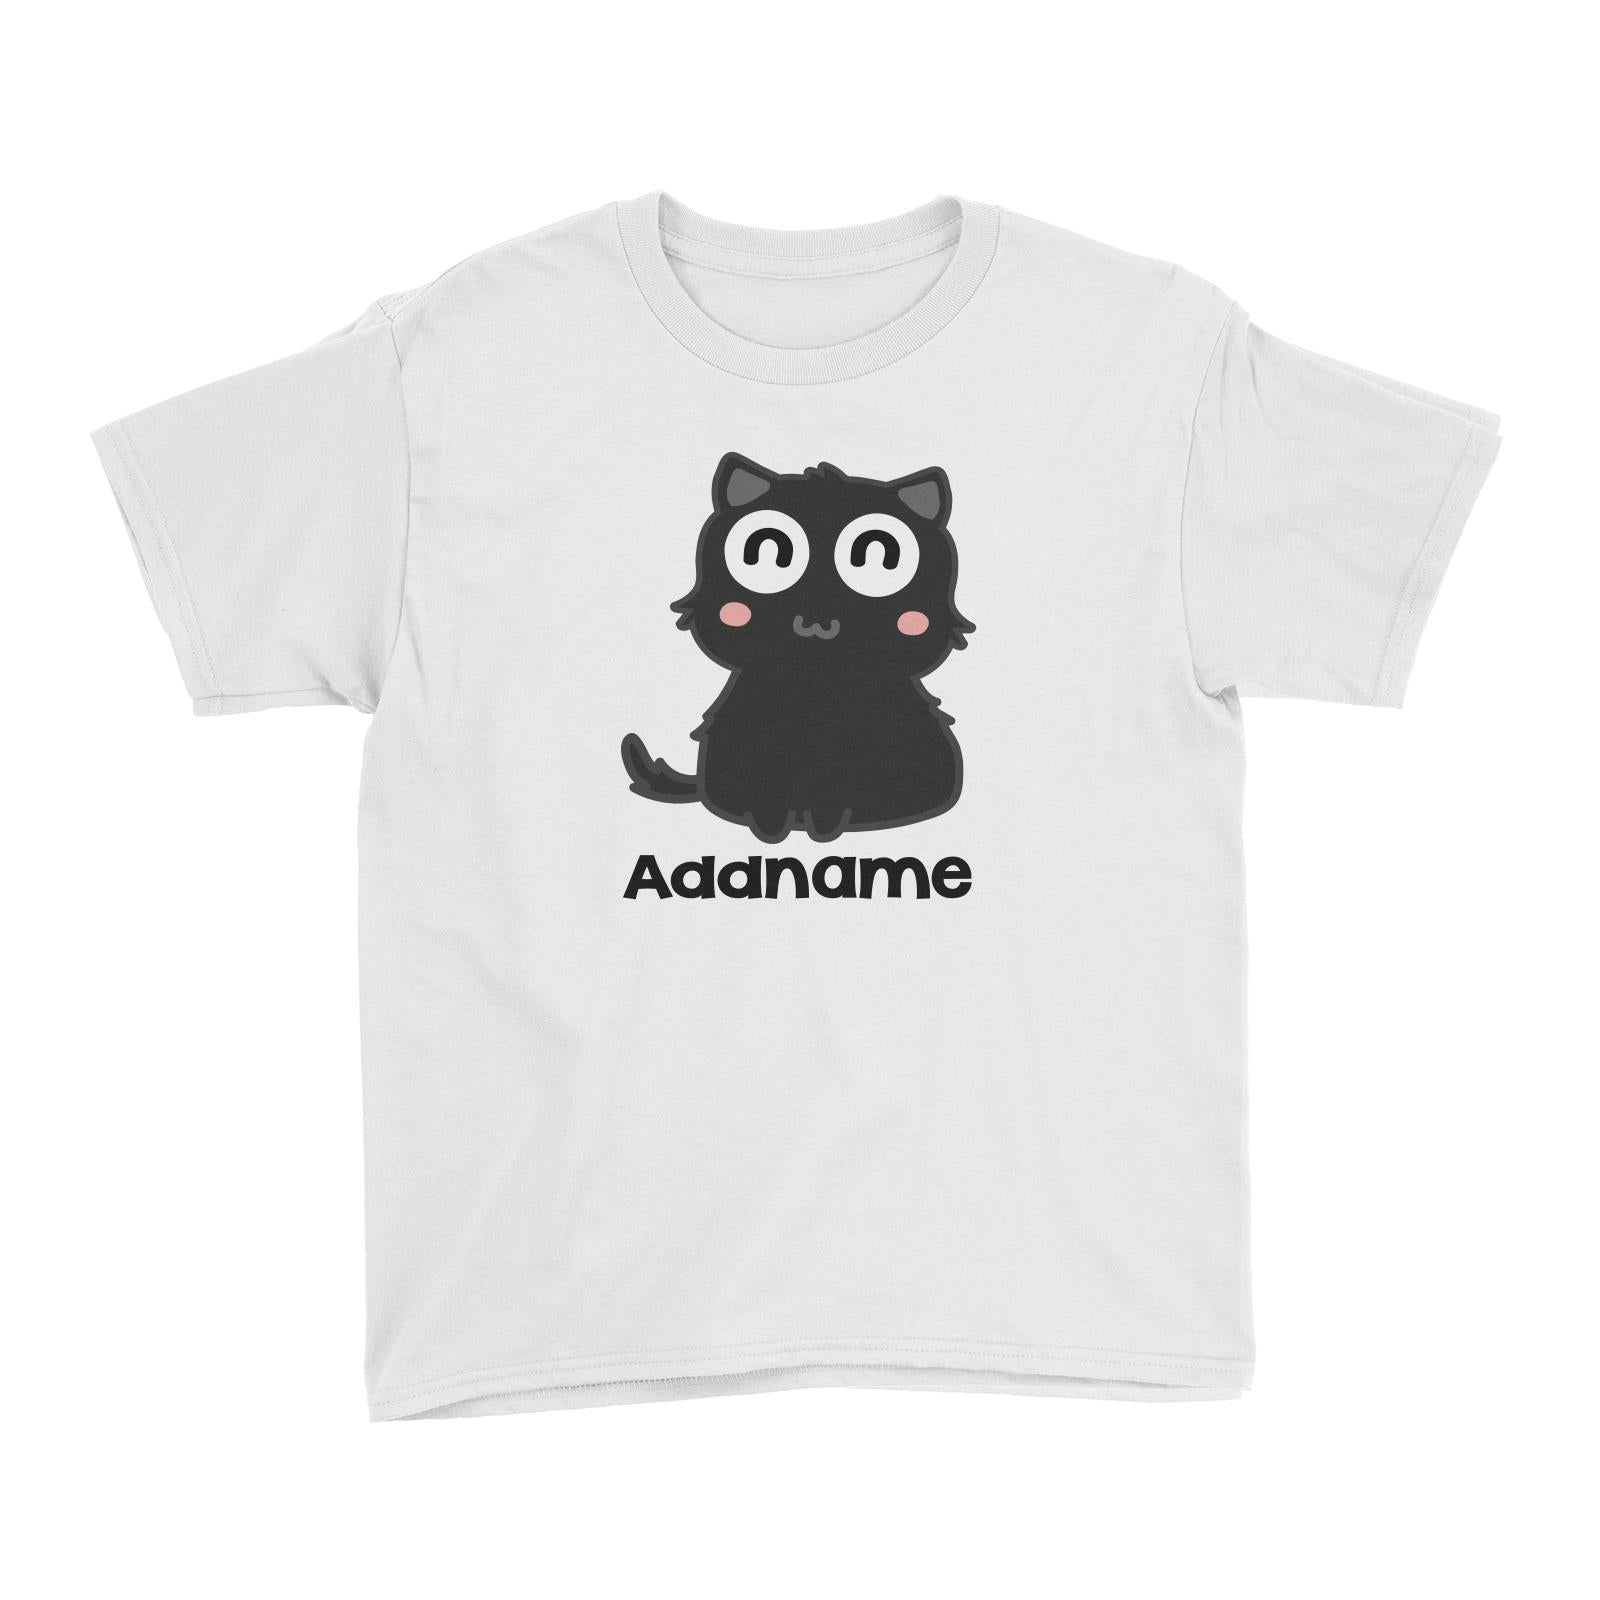 Drawn Adorable Cats Black Addname Kid's T-Shirt